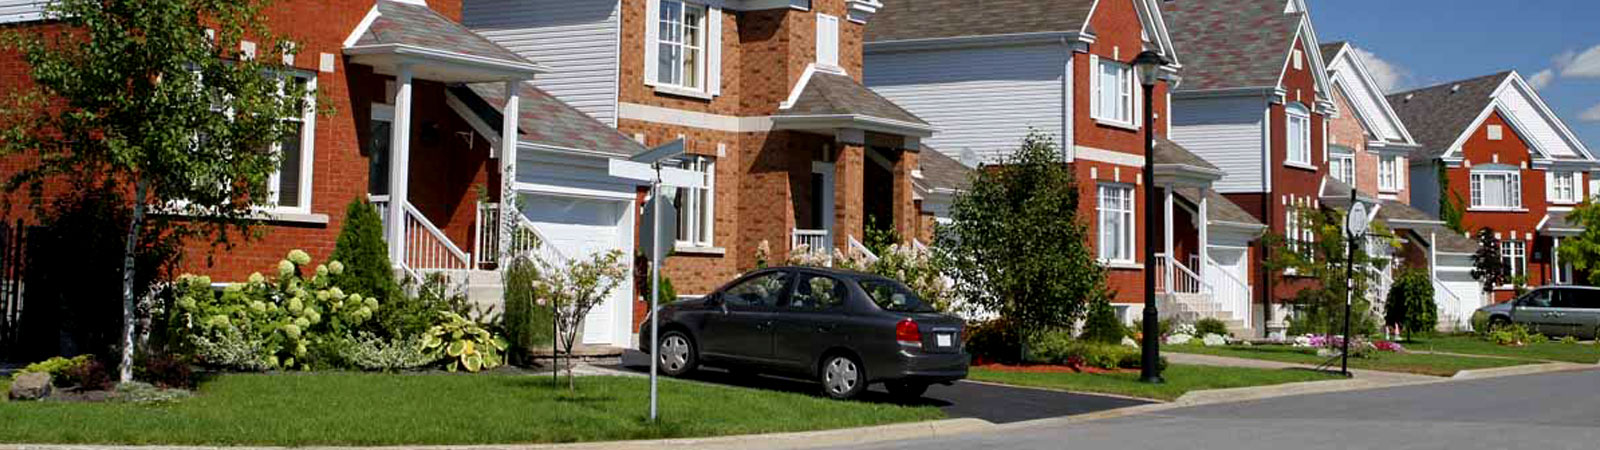 Hire a Property Management Company in Ontario